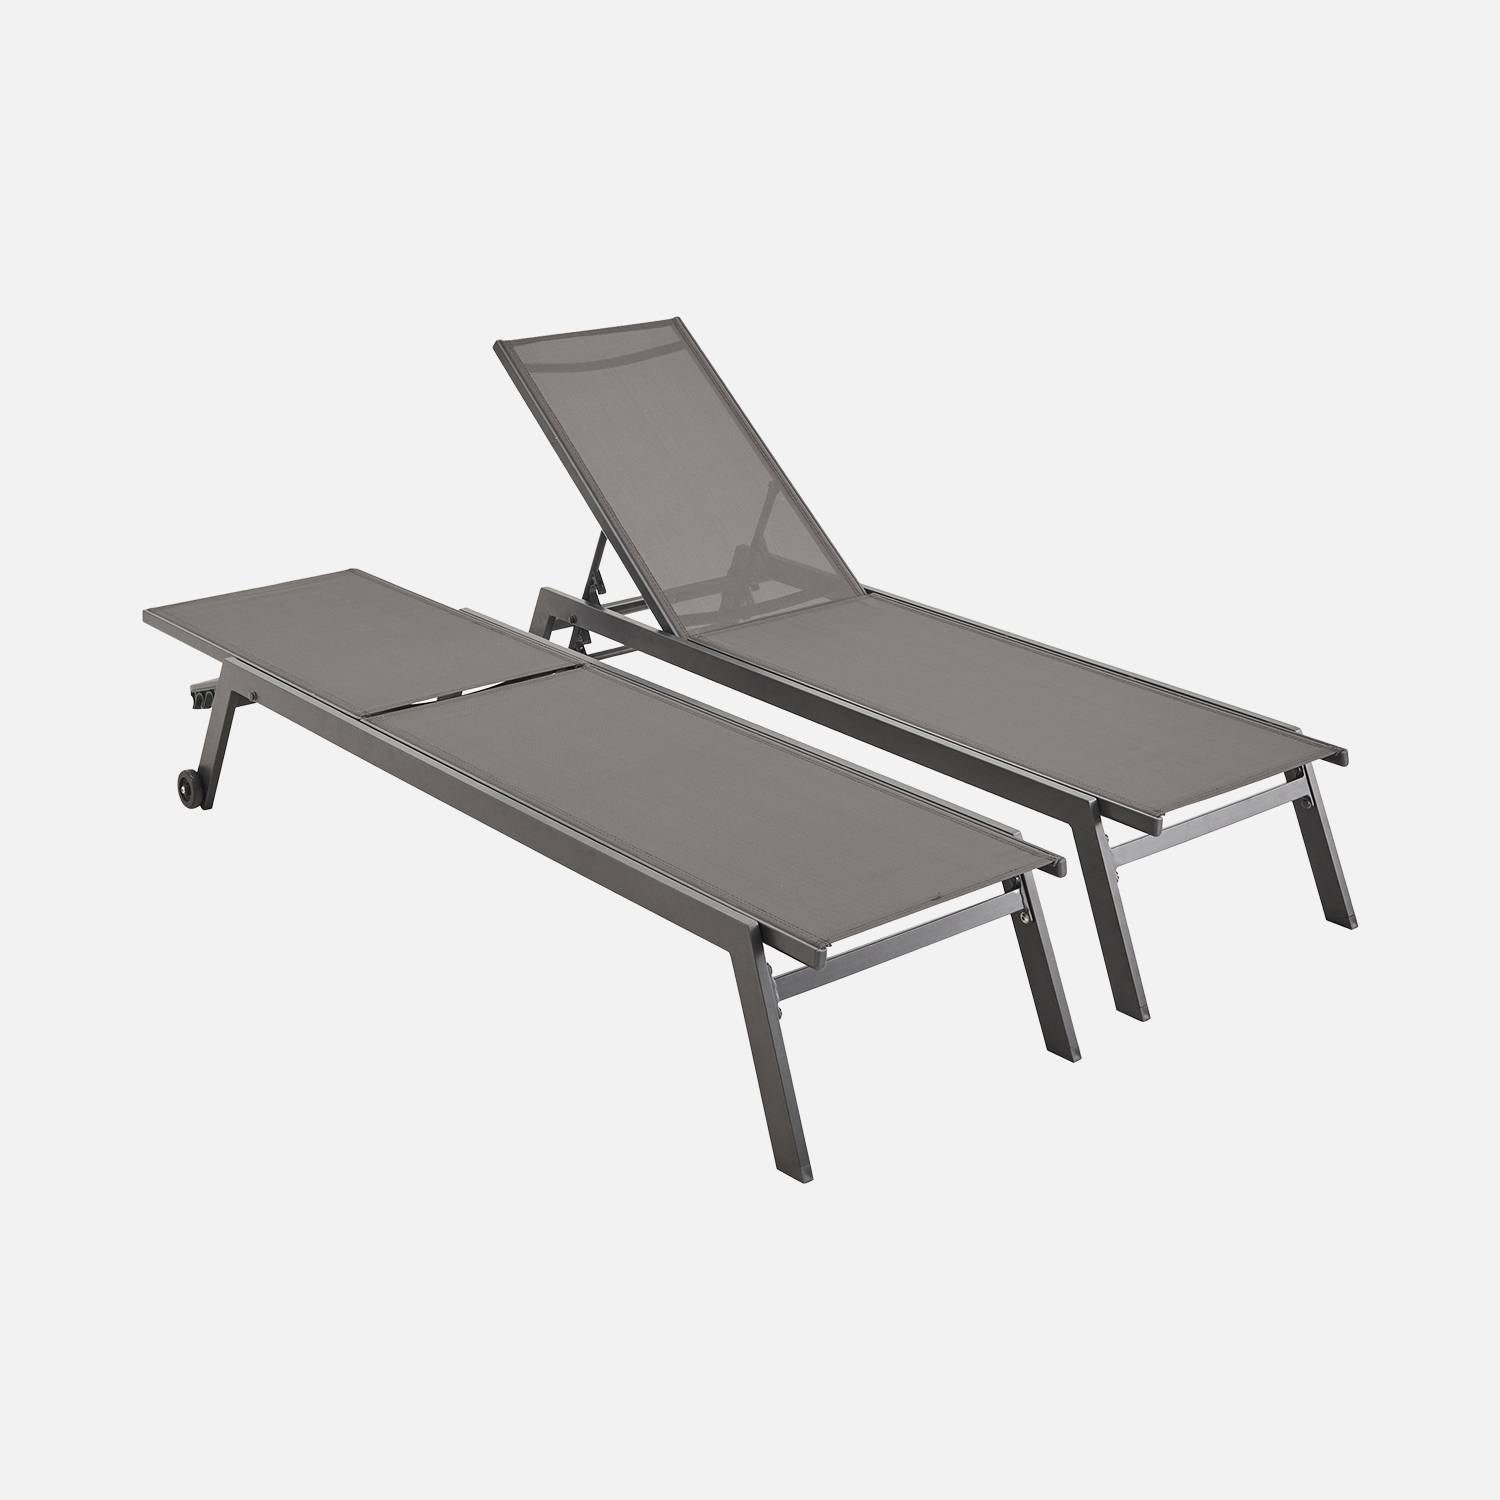 Set of 2 sun loungers in aluminium with wheels, Anthracite/Grey  | sweeek